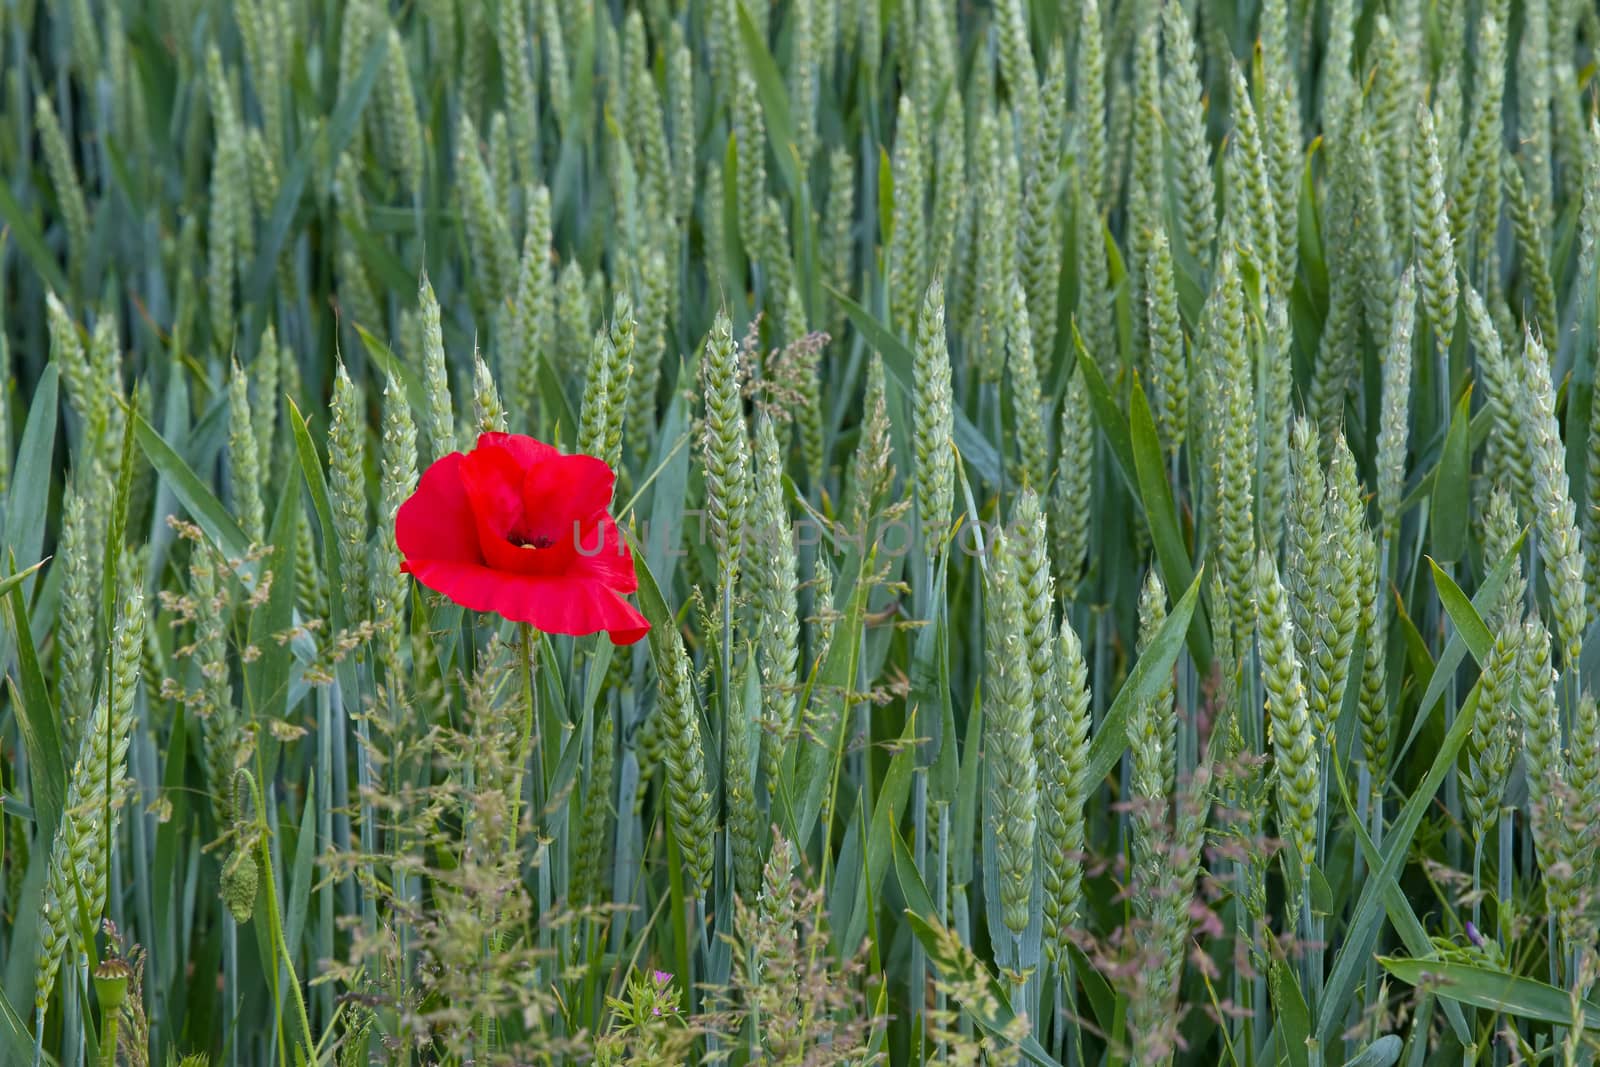 Lone poppy growing in wheat field in East Sussex, England. Shown on left of image.